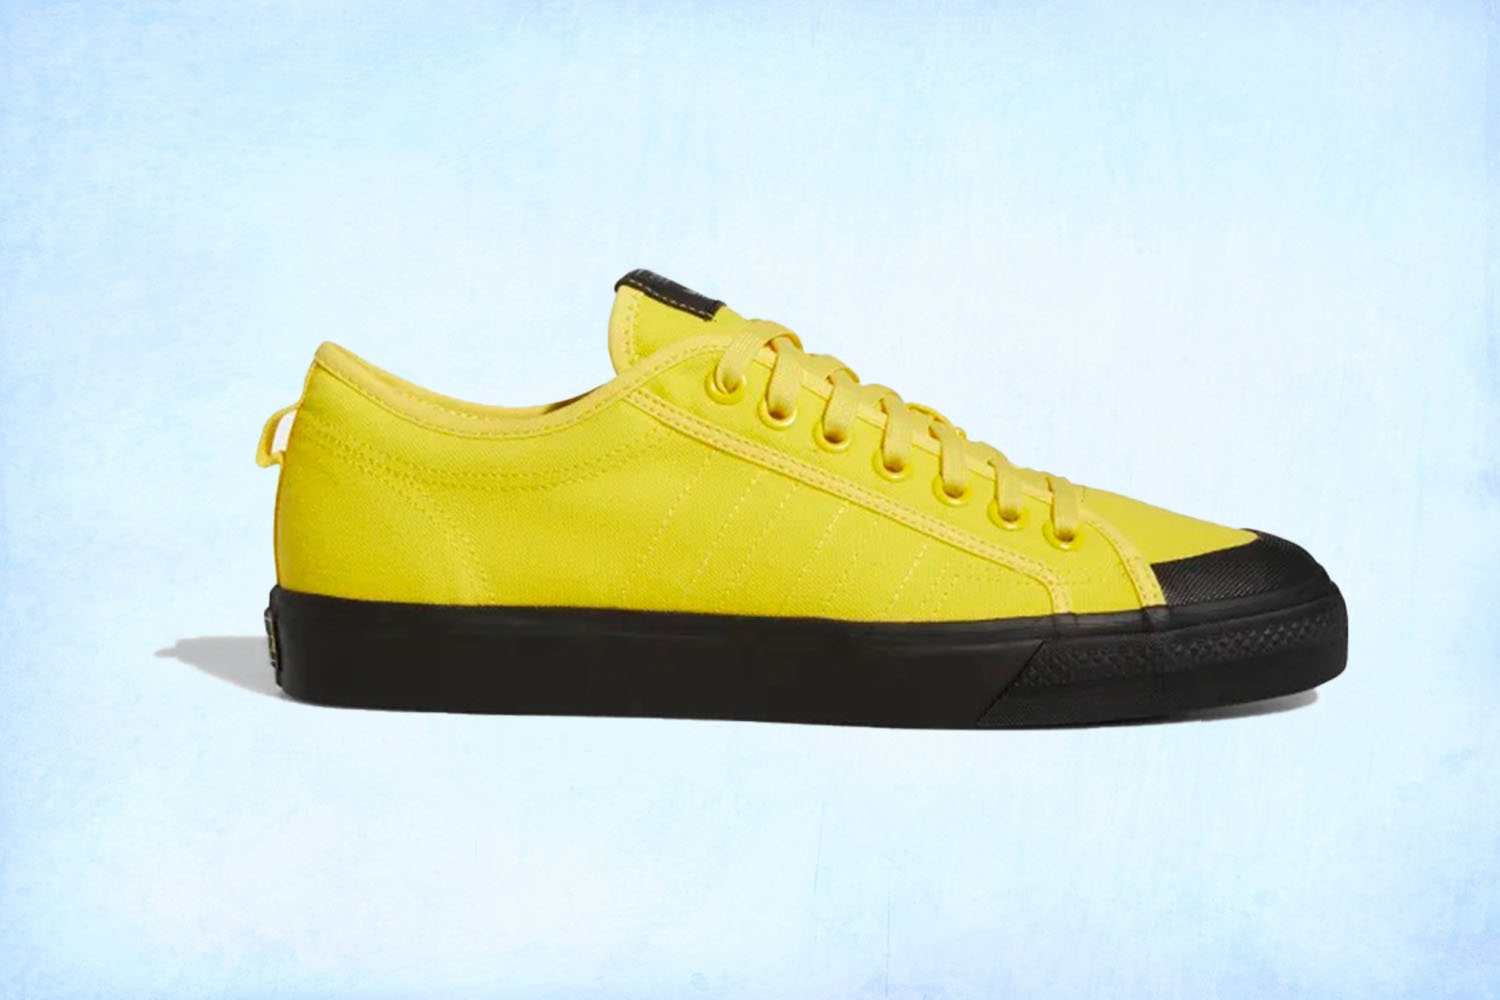 a pair of yellow Adidas Nizza sneakers on a light blue background